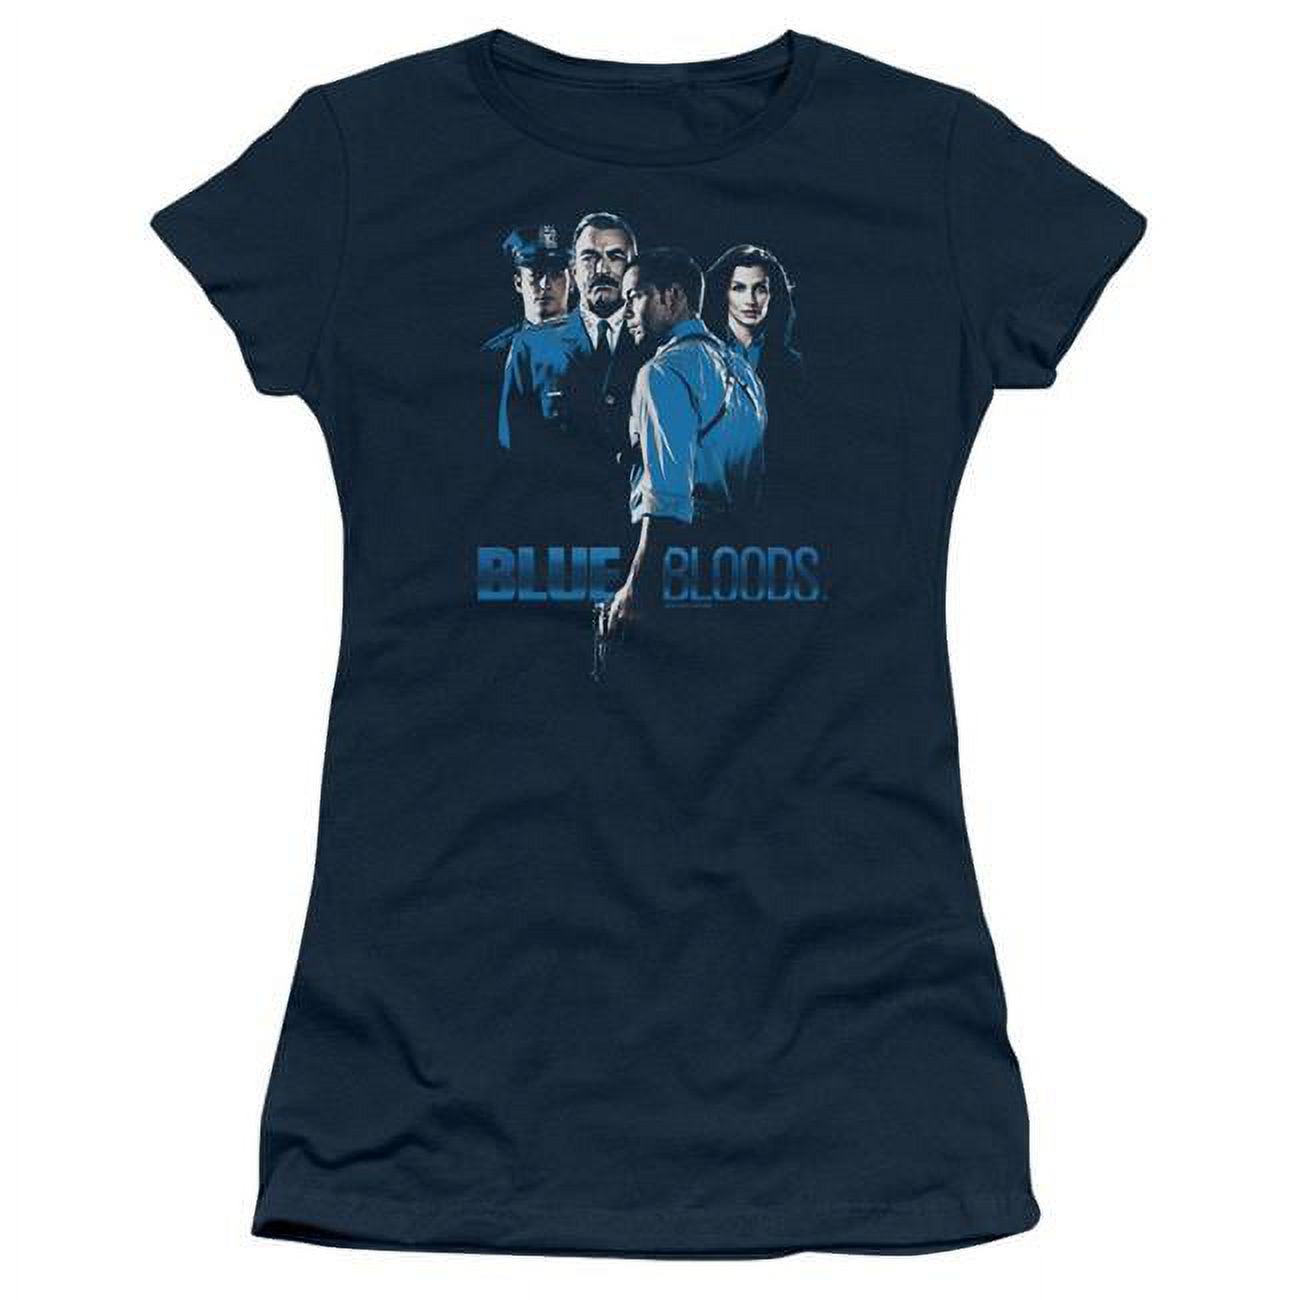 Trevco CBS2463-JS-4 Blue Bloods & Blue Inverted Short Sleeve Junior Sheer Cotton T-Shirt, Navy - Extra Large - image 1 of 1